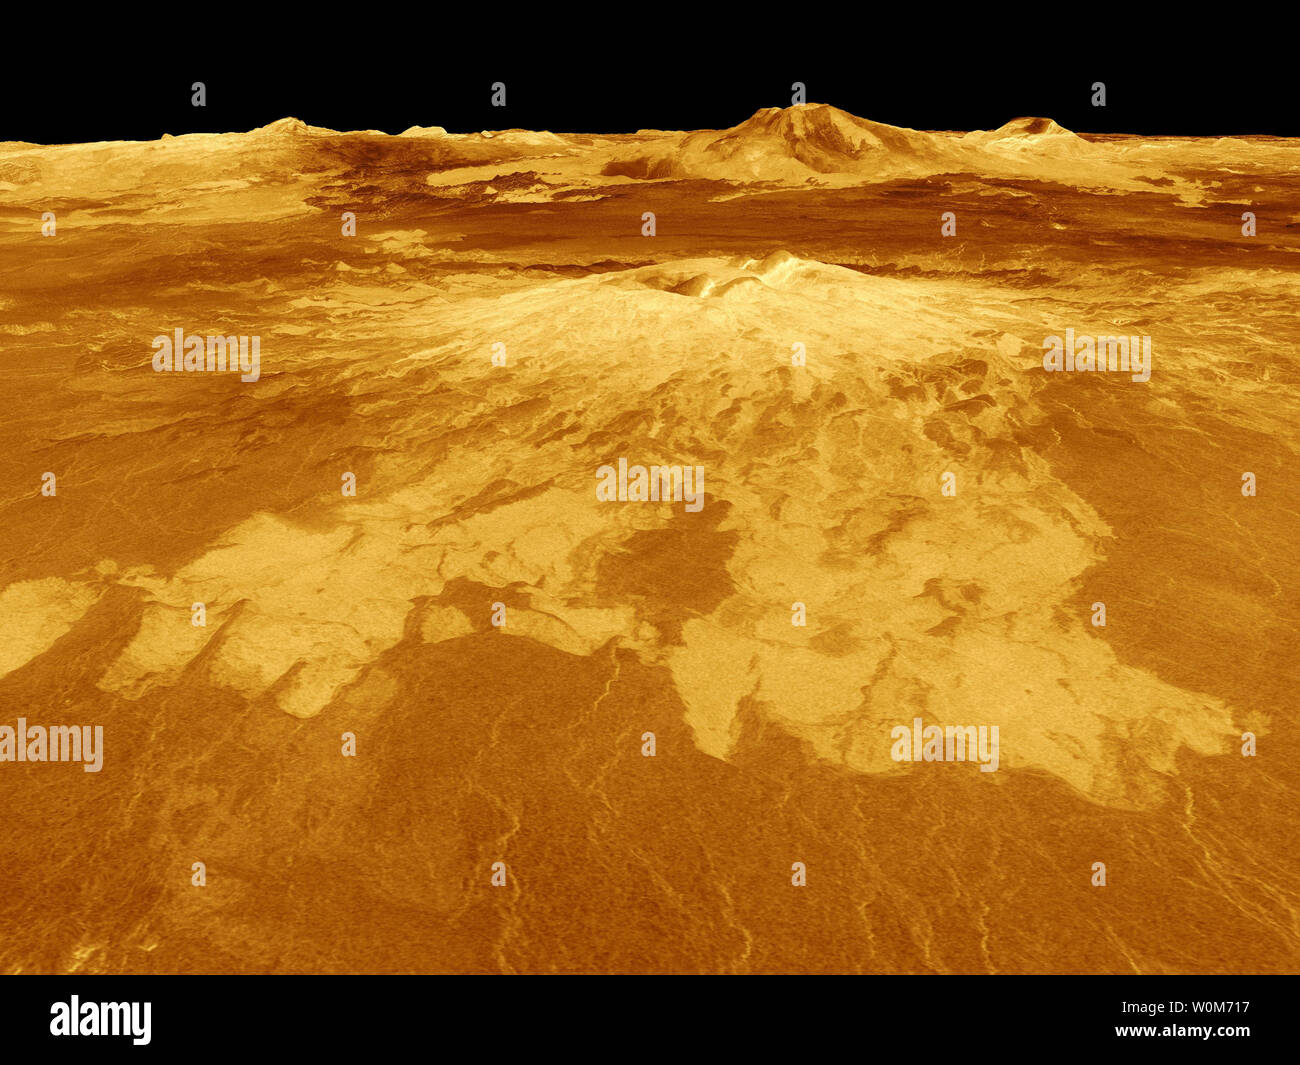 A volcano named Sapas Mons dominates this computer-generated view of the surface of Venus in image released June 30, 2005. Lava flows extend for hundreds of kilometers across the fractured plains shown in the foreground to the base of the mountain, which measures 248 miles across 0.9 mile high. The simulated hues are based on color images recorded by the Soviet Venera 13 and 14 spacecraft. The image was produced by the Solar System Visualization project and the Magellan Science team at the JPL Multimission Image Processing Laboratory.  (UPI Photo/NASA/JPL) Stock Photo